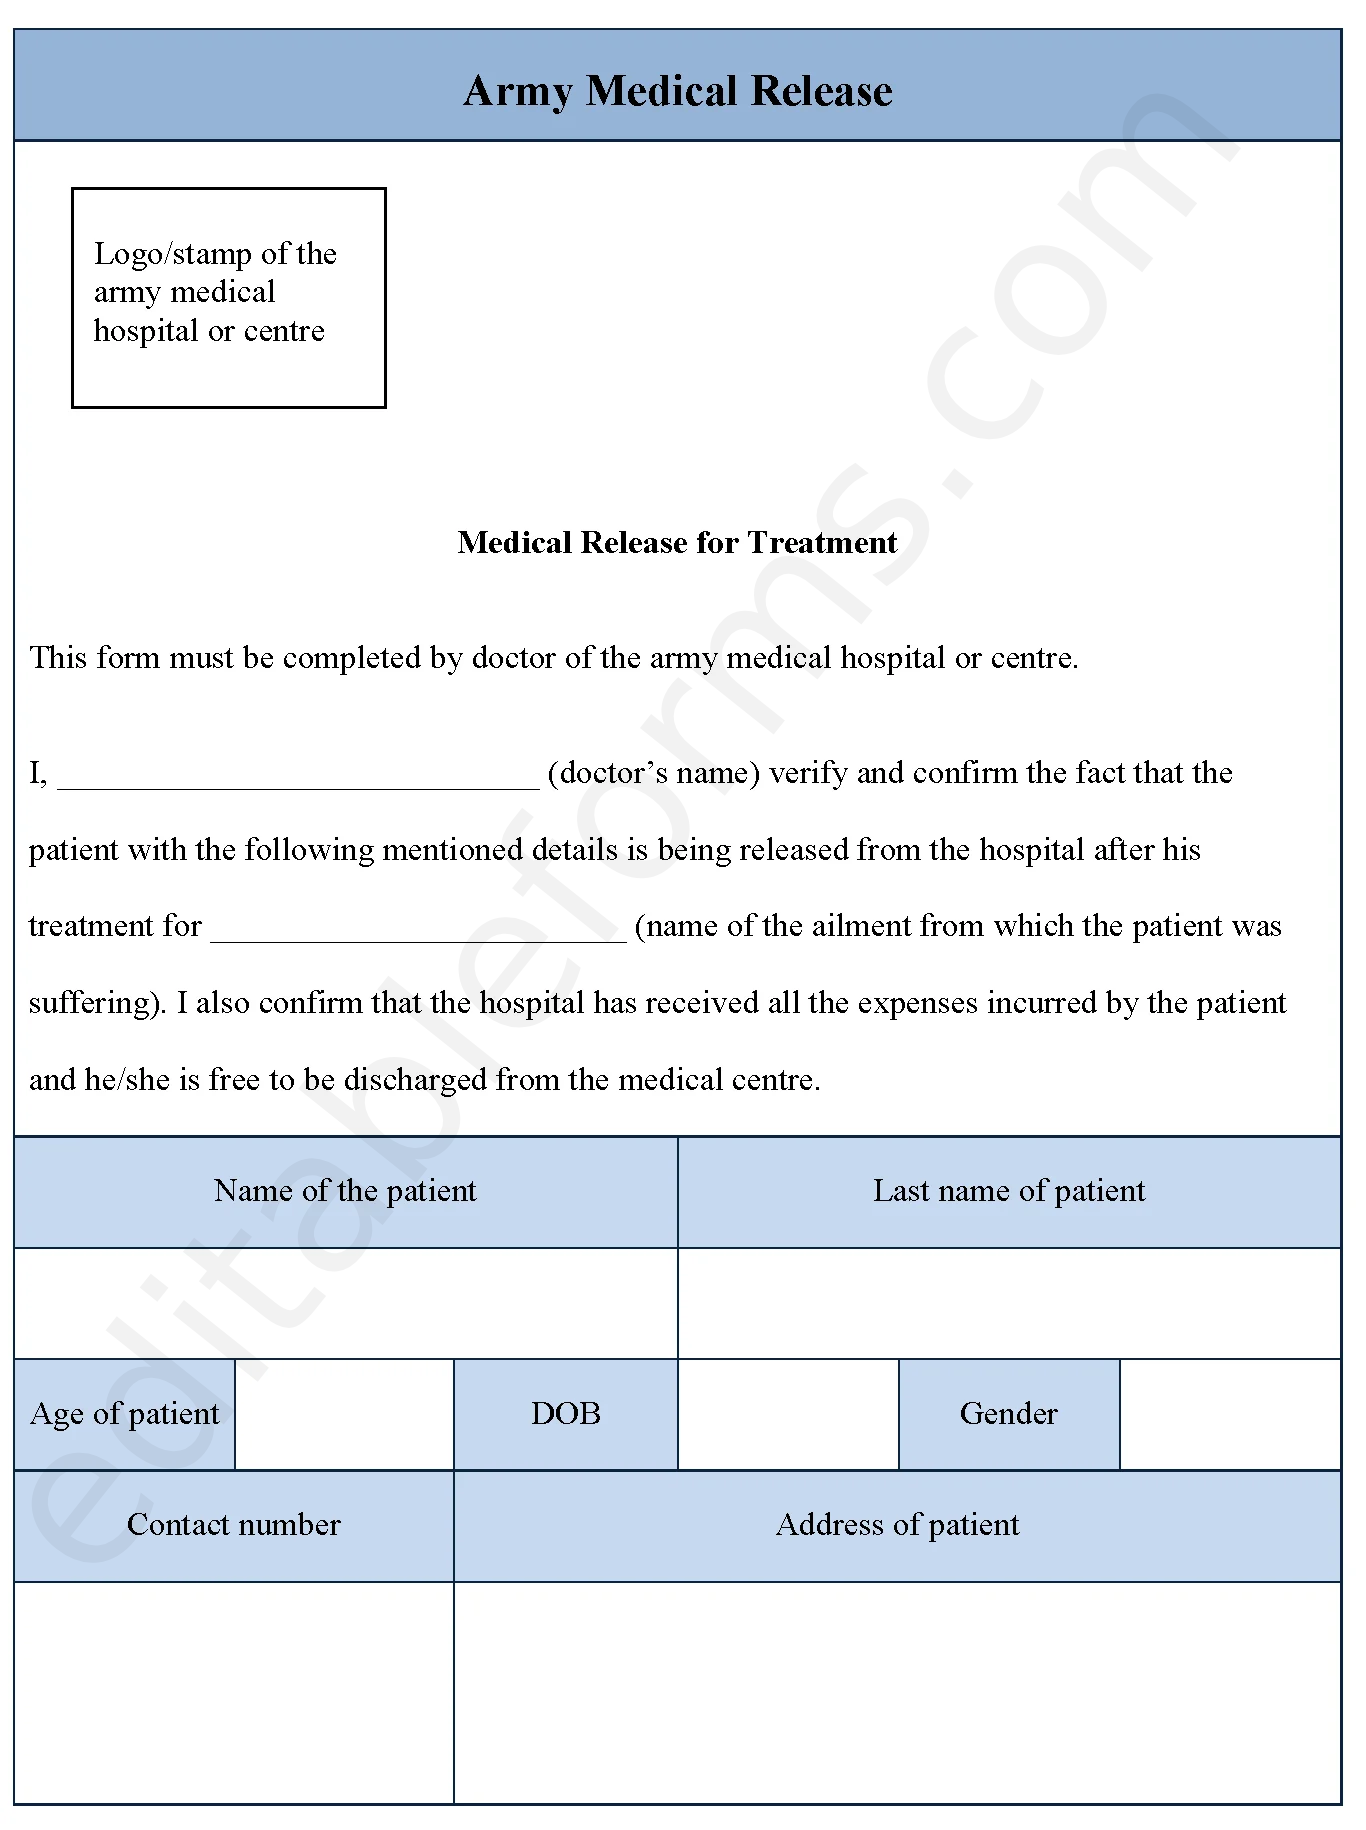 Army Medical Release Fillable PDF Template